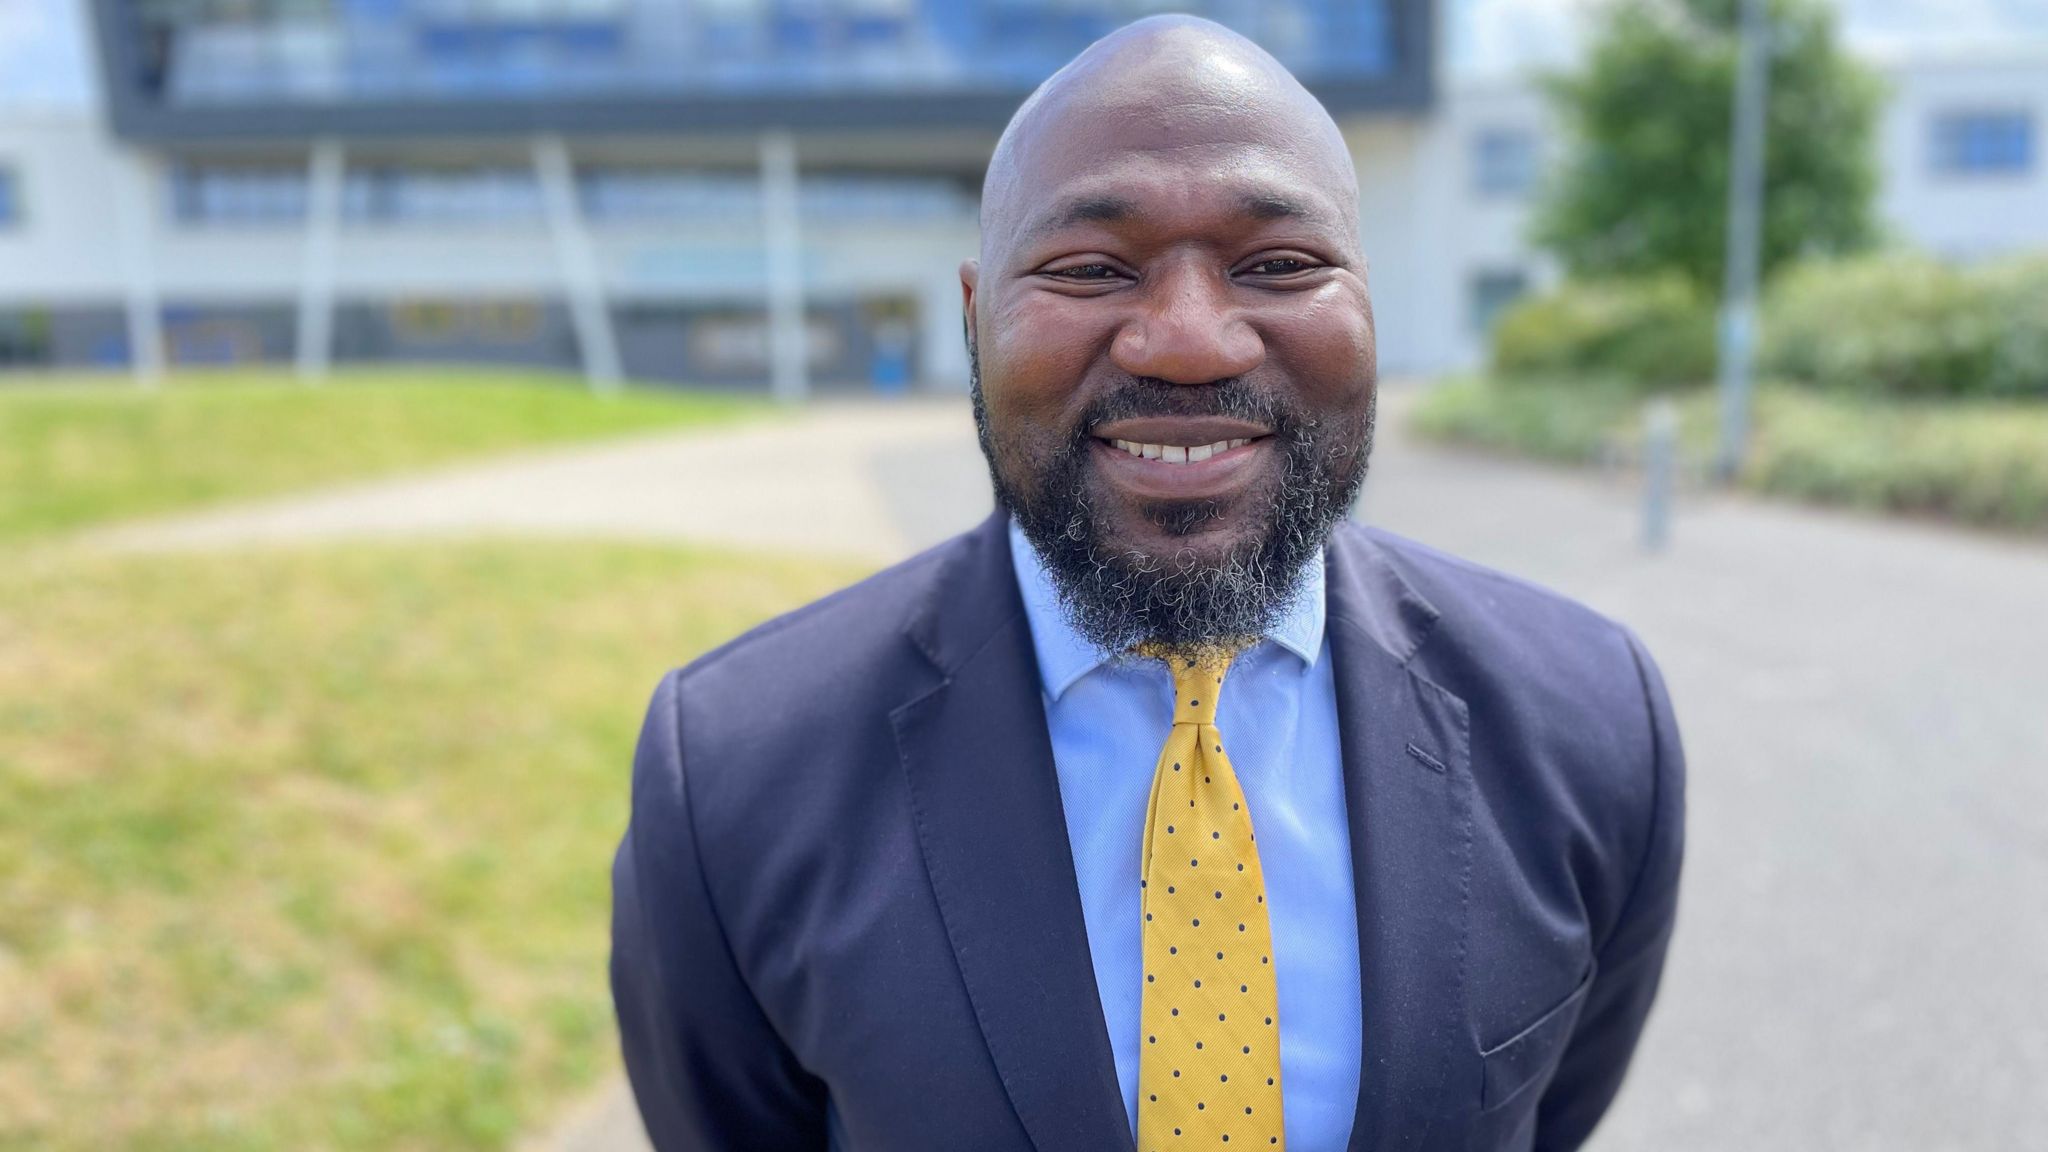 Festus Akinbusoye in a suit and yellow tie, smiling towards the camera